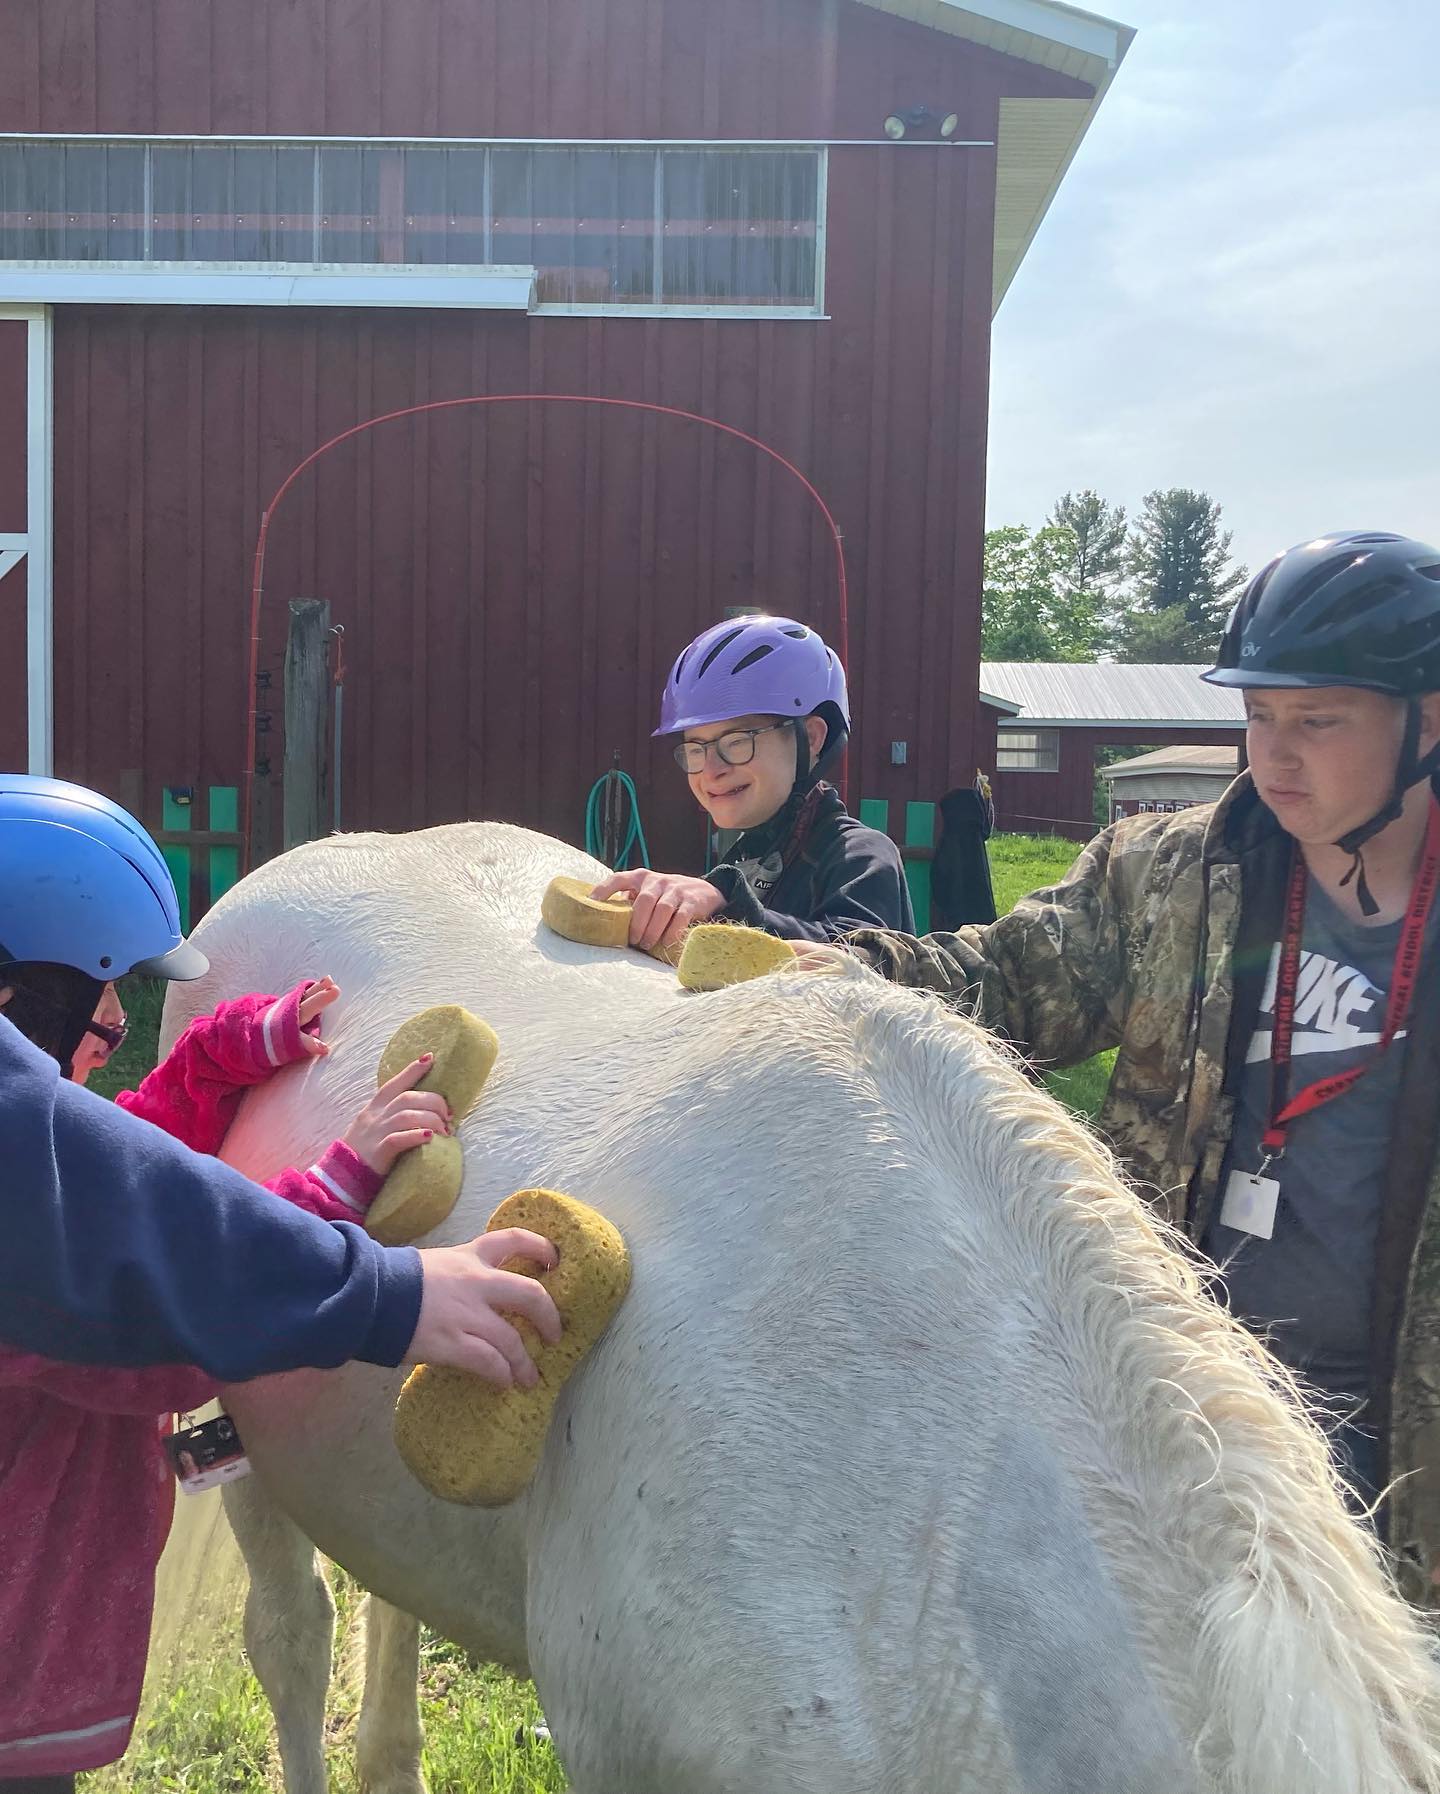 A close up of several kids putting sponges on the back of a white pony in front of a red barn